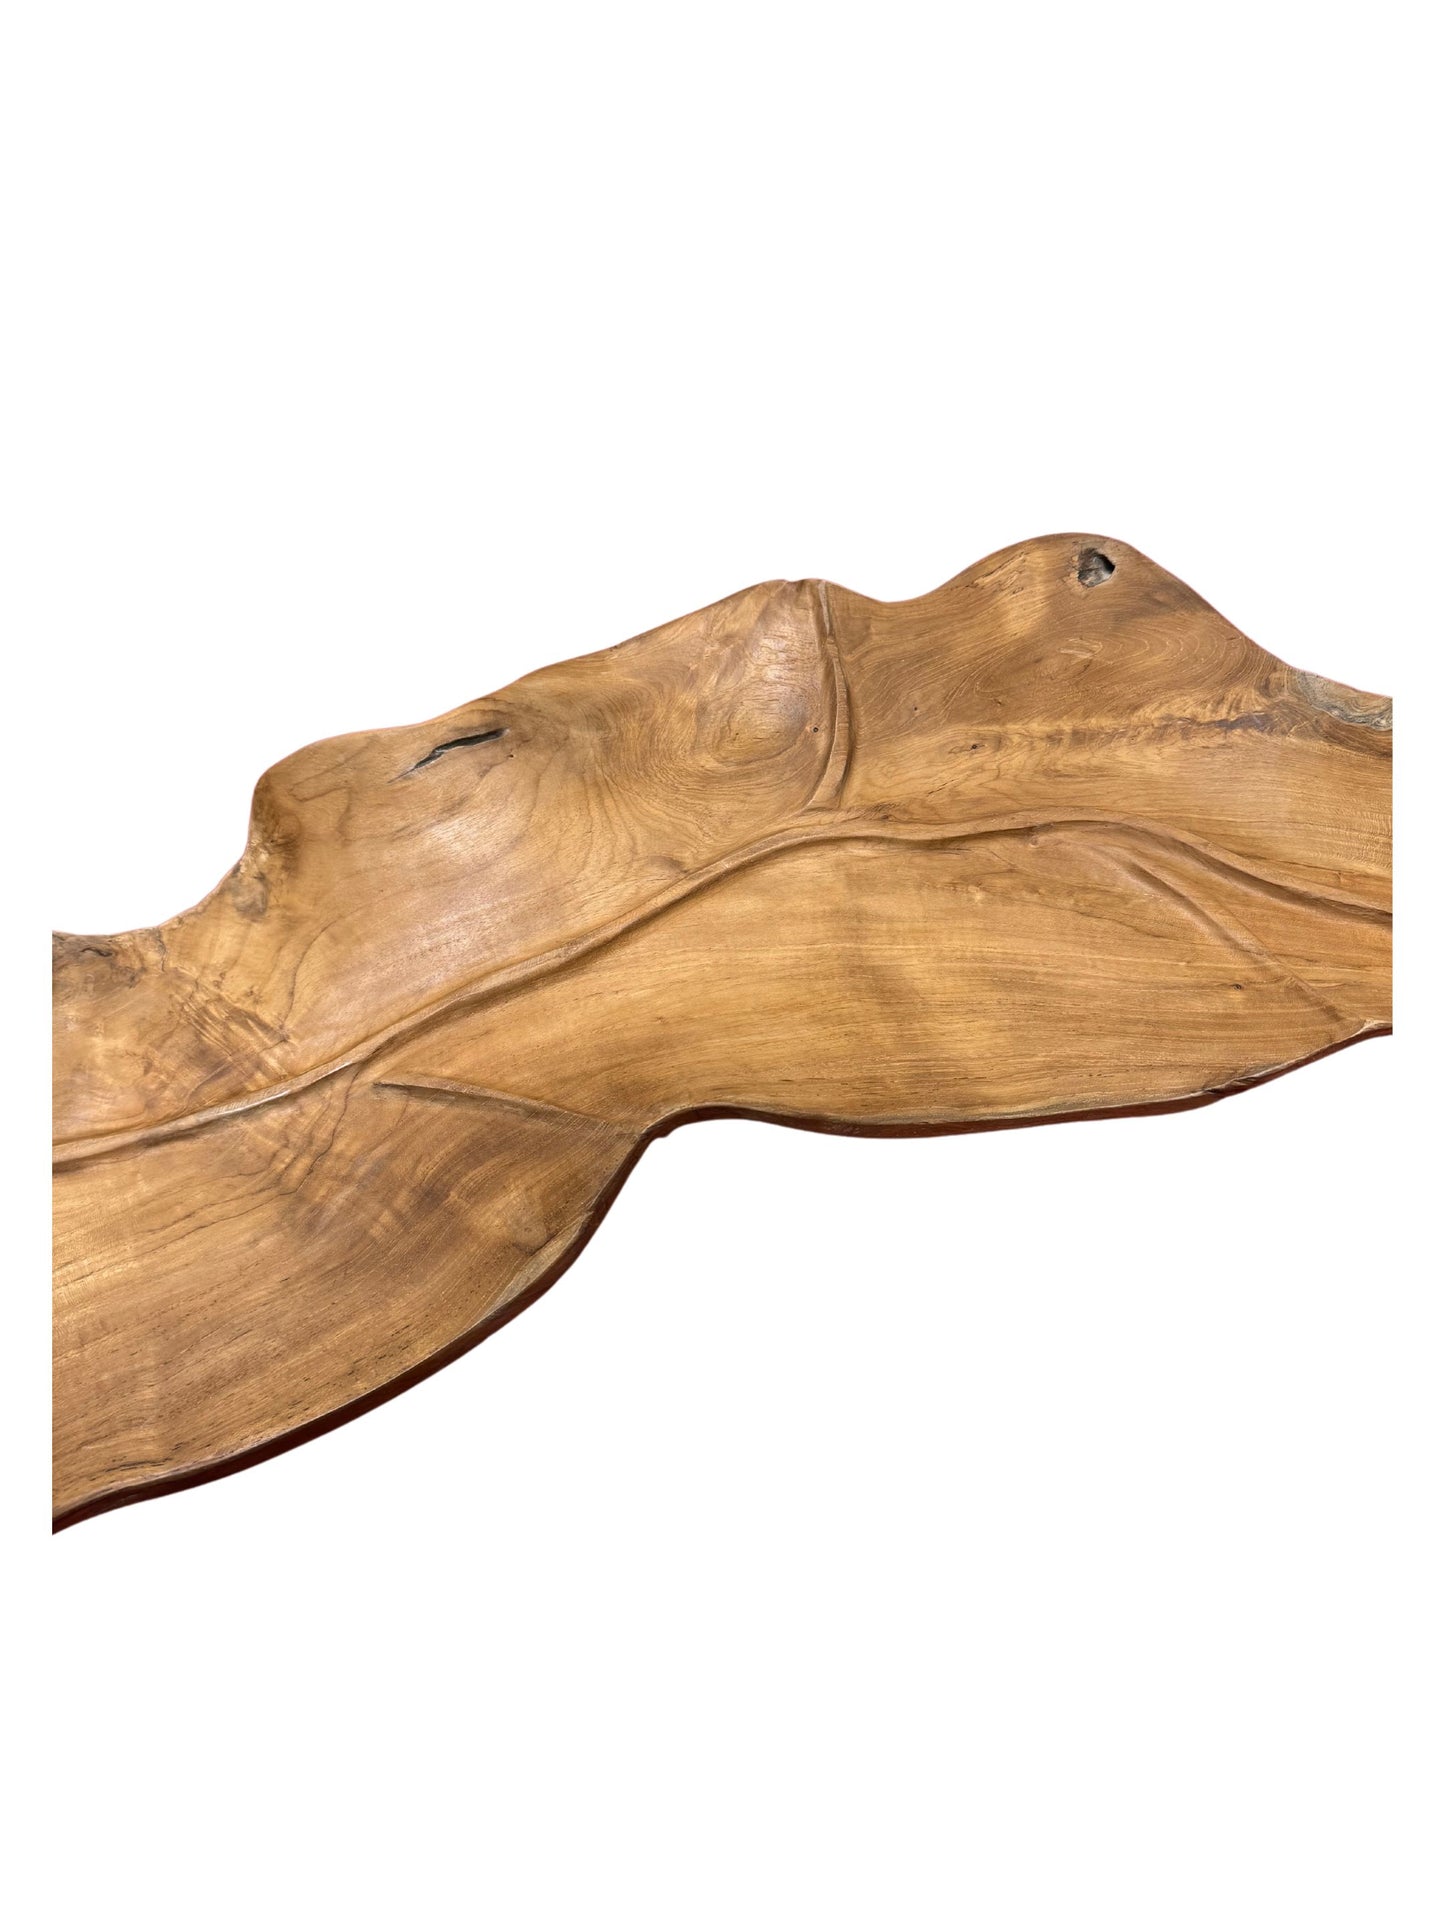 Eclectic Home Accent Teak Leaf Plate 1228M Wooden Decor Furniture